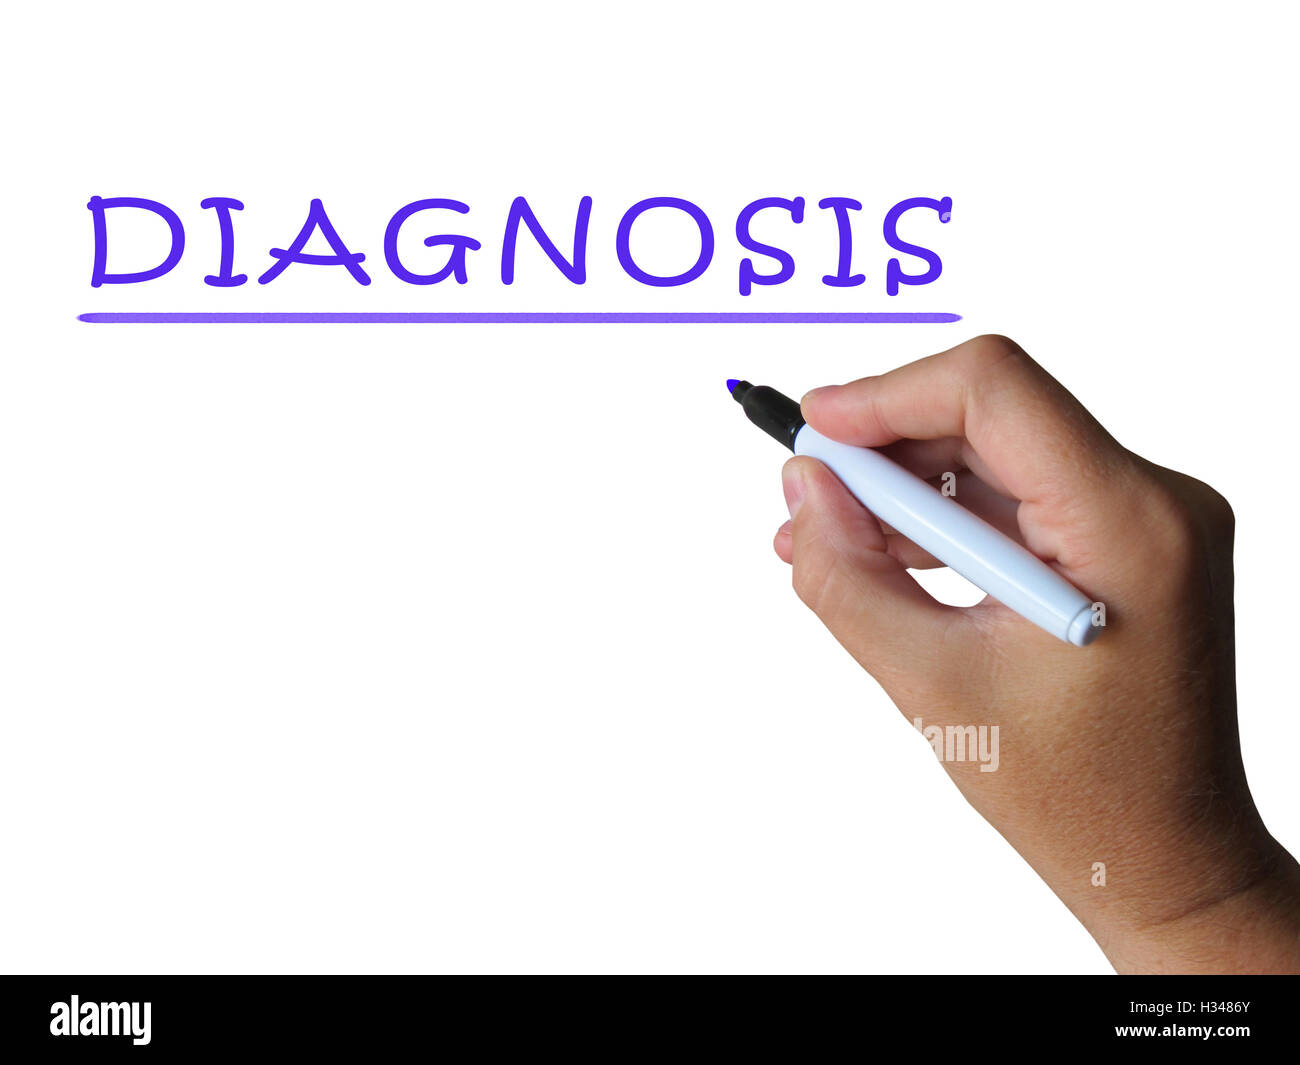 Diagnosis Word Shows Medical Conclusion About Illness Stock Photo